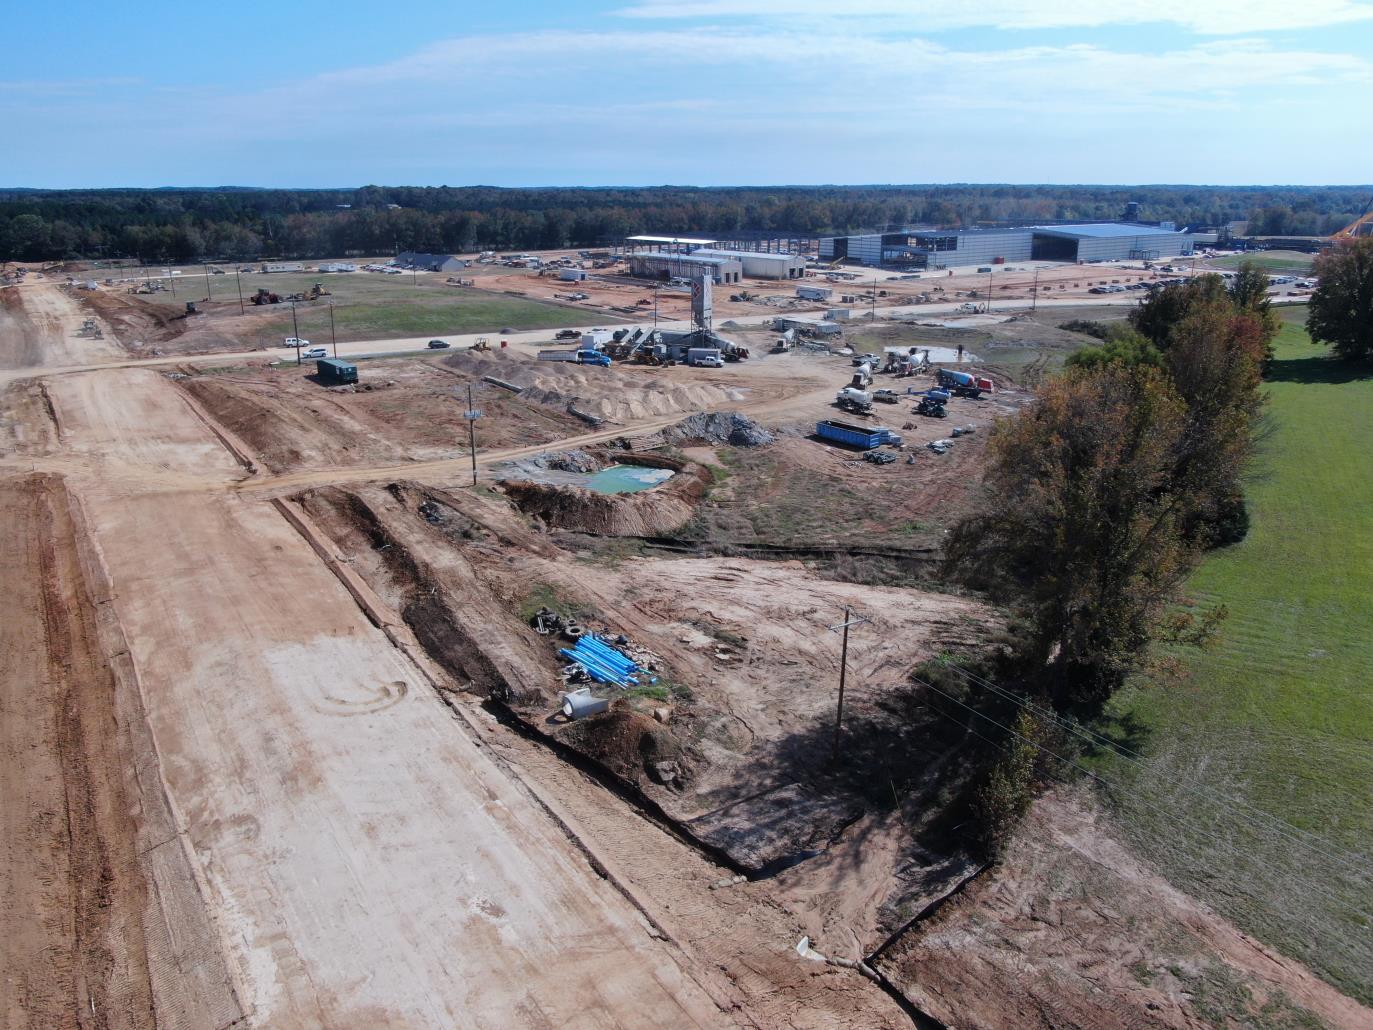 Ensuring power lines were carefully placed to stay clear of sawmill facilities was a critical part of the project.